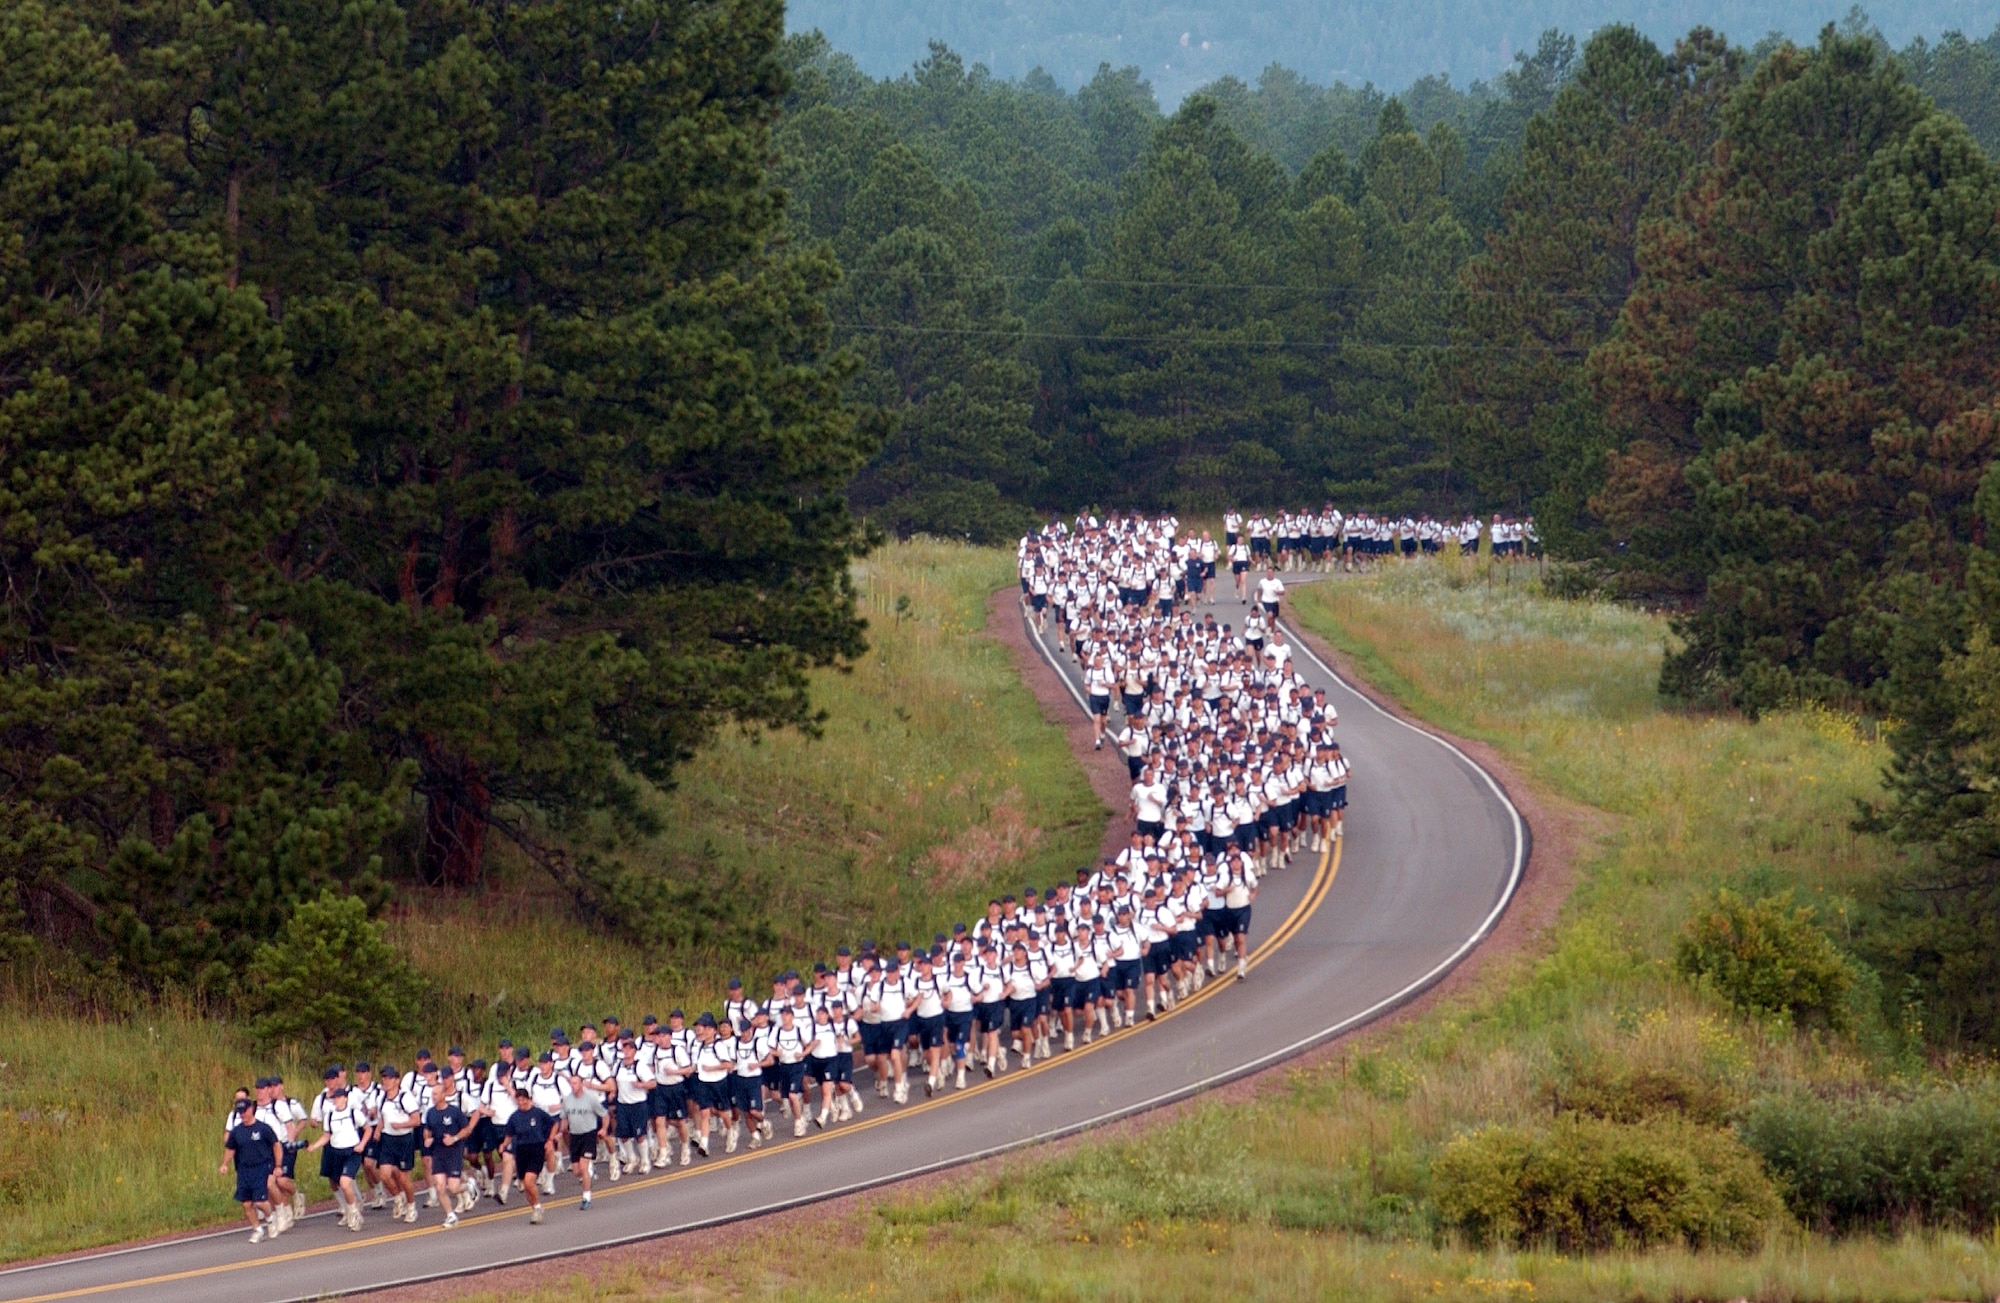 U.S. AIR FORCE ACADEMY, Colo. -- More than 1,200 people from the Air Force Academy's Class of 2008 begin their 36-mile relay "Warrior Run."  The relay began at the school's Jacks Valley training area then meandered through Pike National Forest.  The 11-leg, seven-hour run is the final event for the class's basic cadet training.  (U.S. Air Force photo by Ken Wright)               